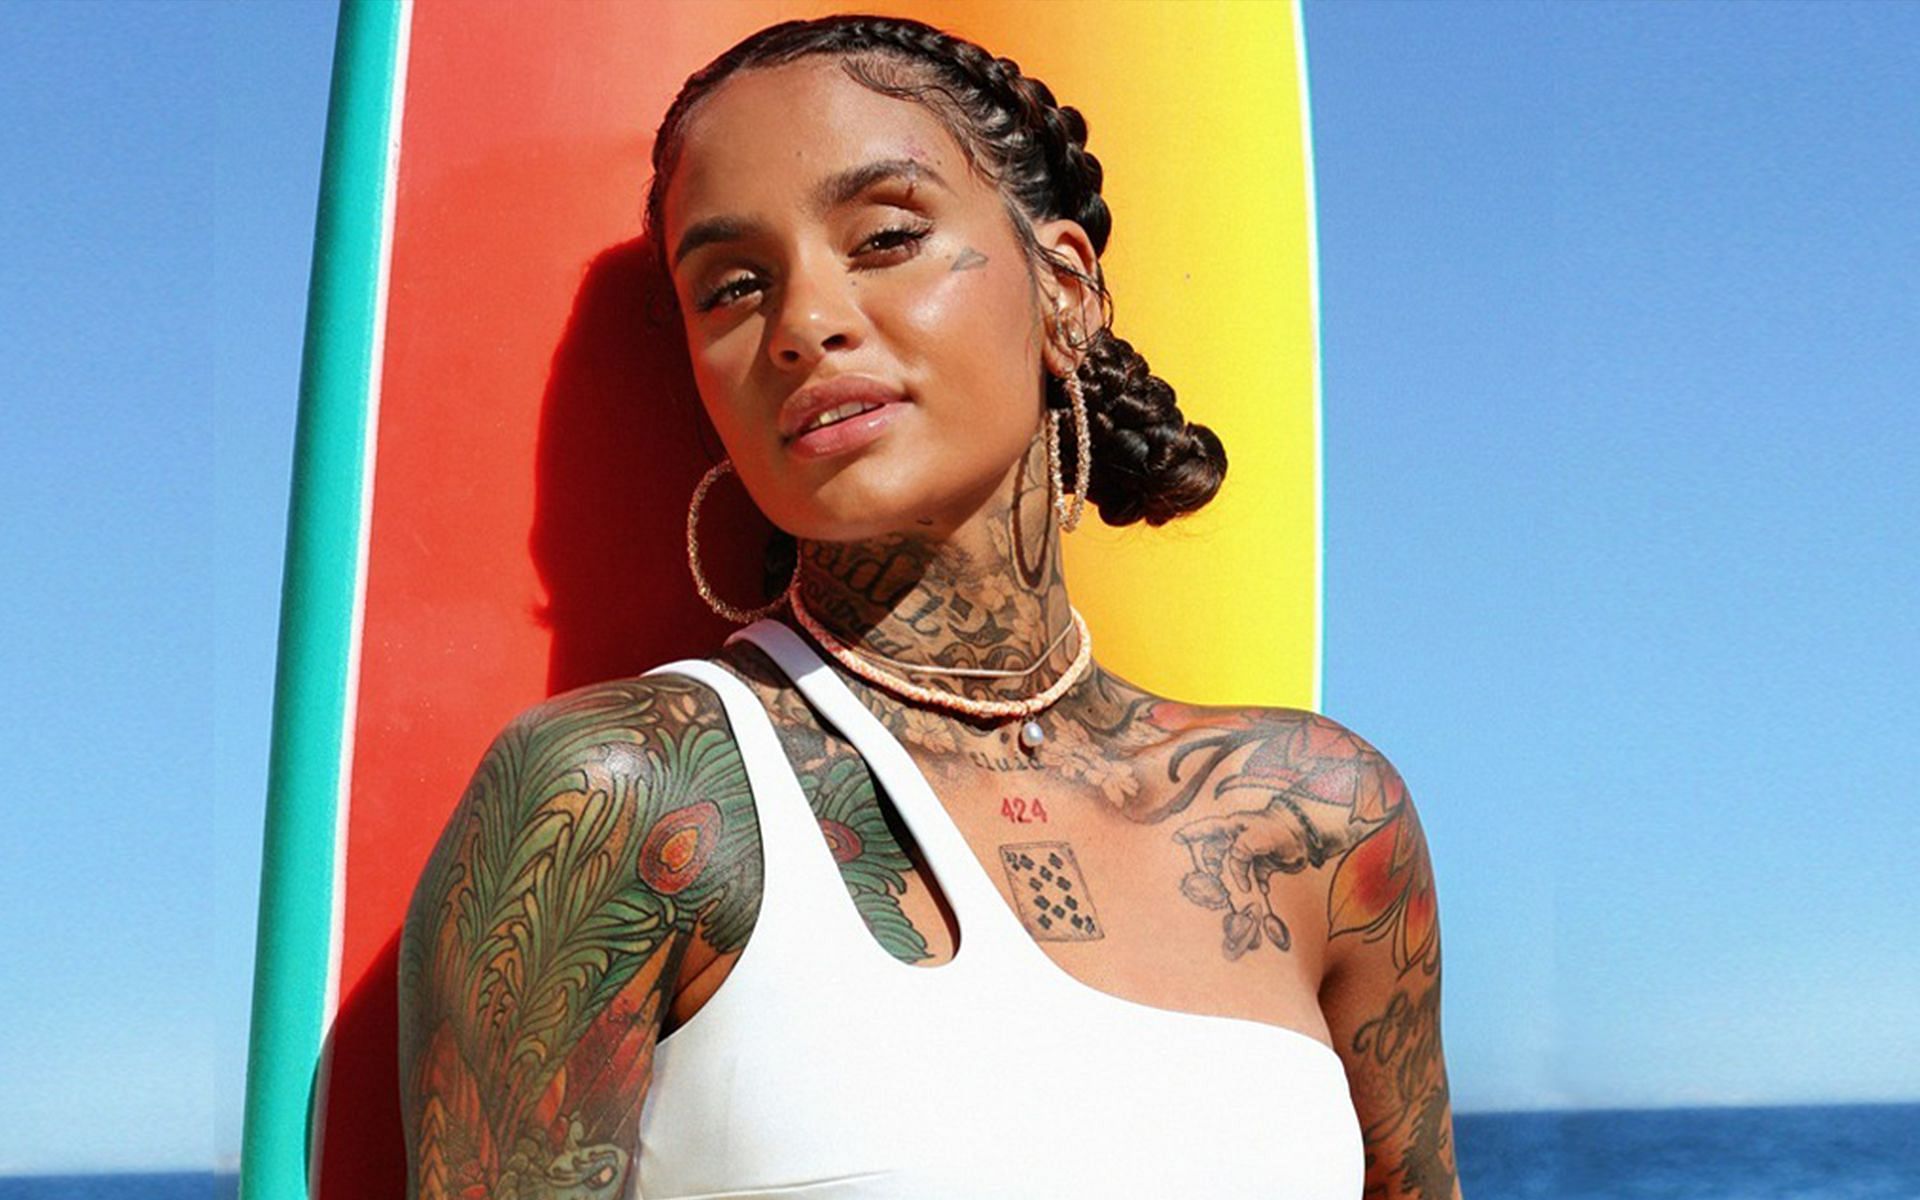 Kehlani is the face of the label&#039;s campaign (Image via H&amp;M)